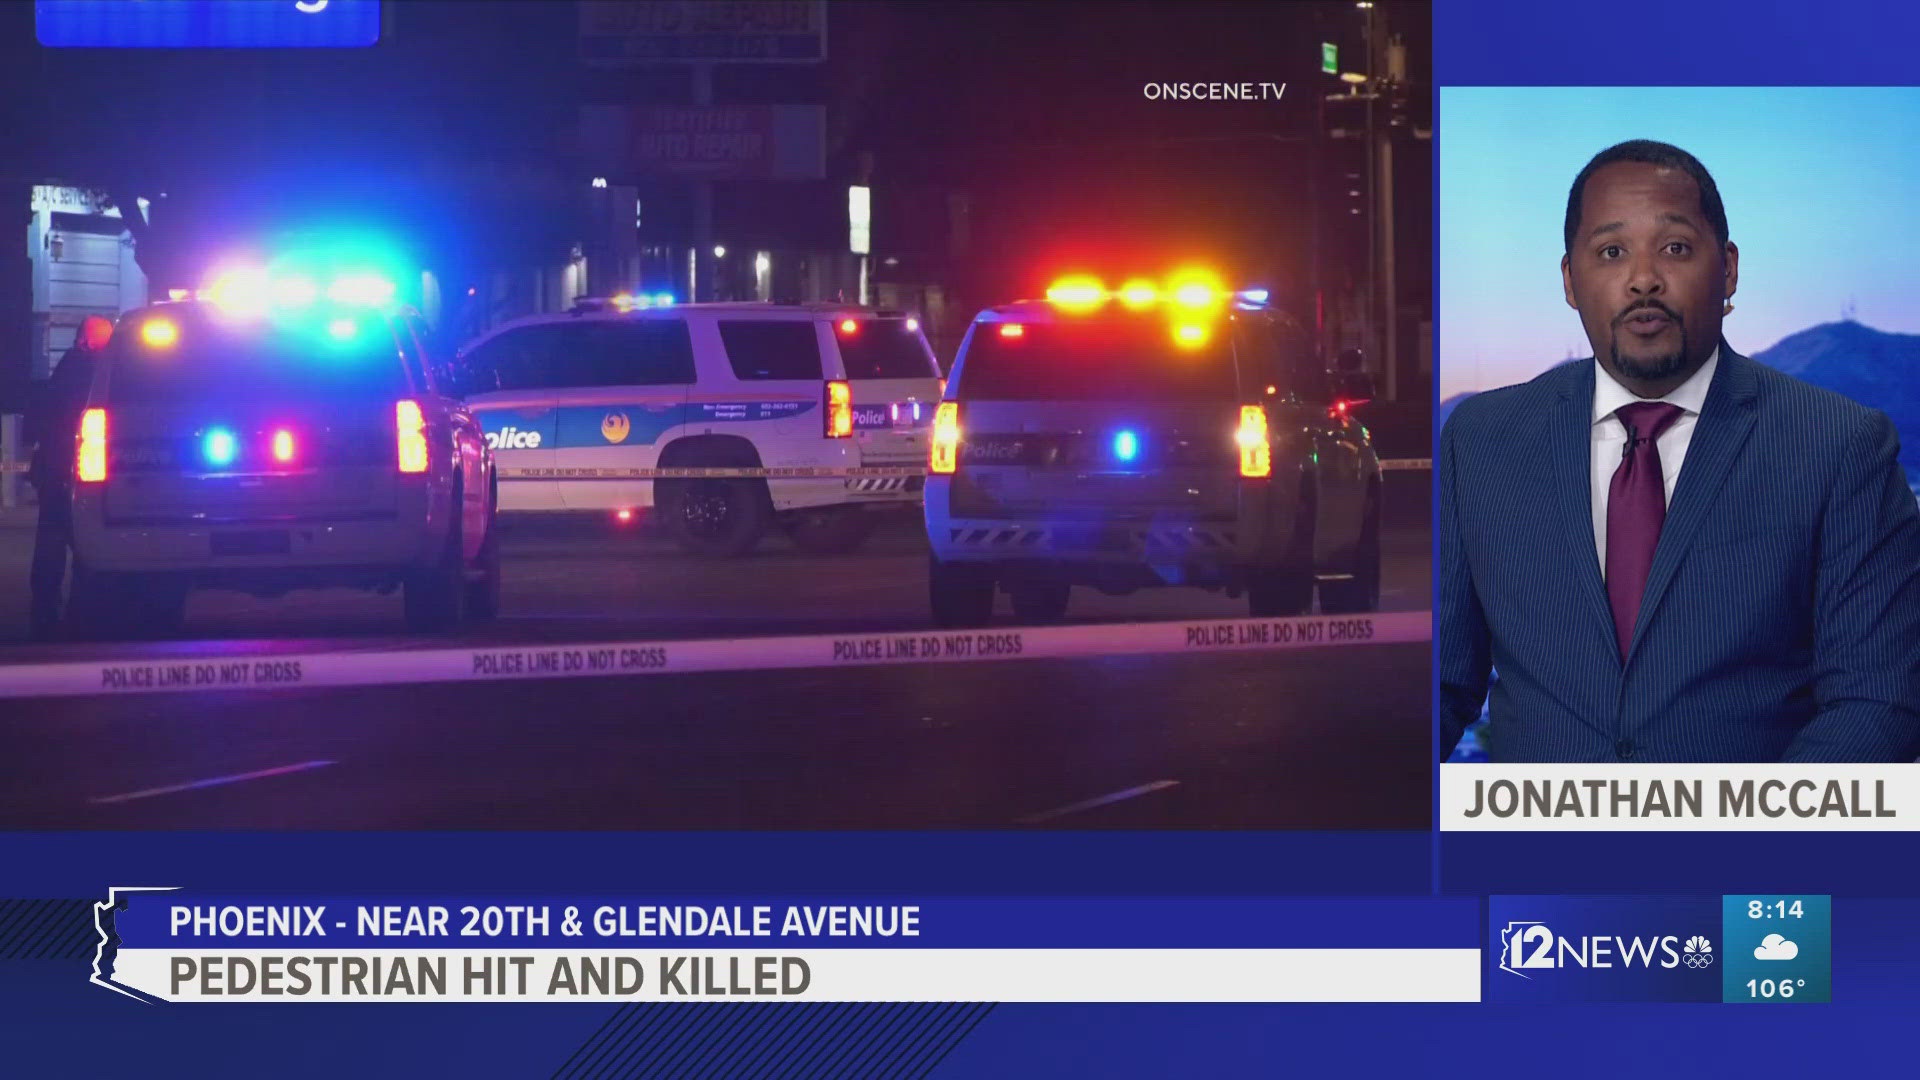 Officials said the man was killed while crossing Glendale Avenue.